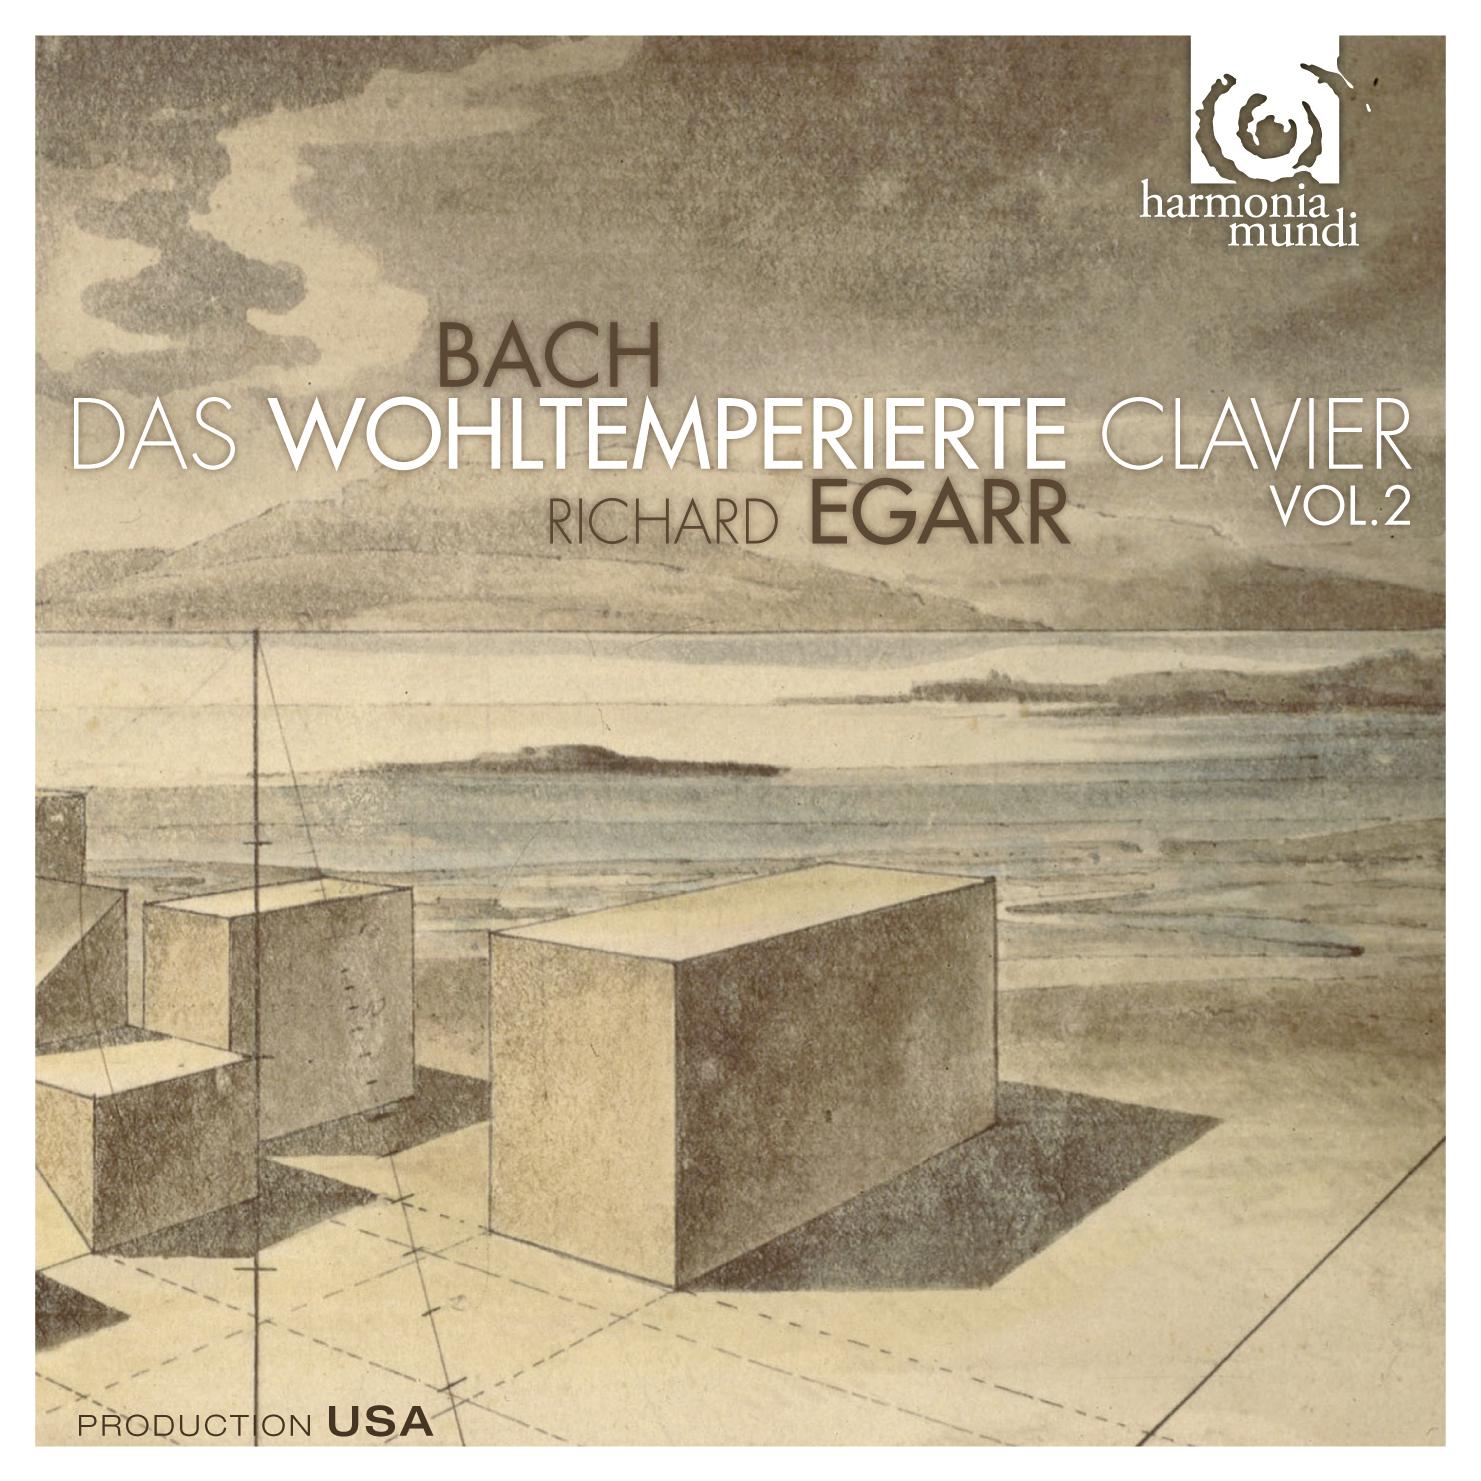 Well-Tempered Clavier, Book II, BWV 870-893: Prelude XI in F Major, BWV 880